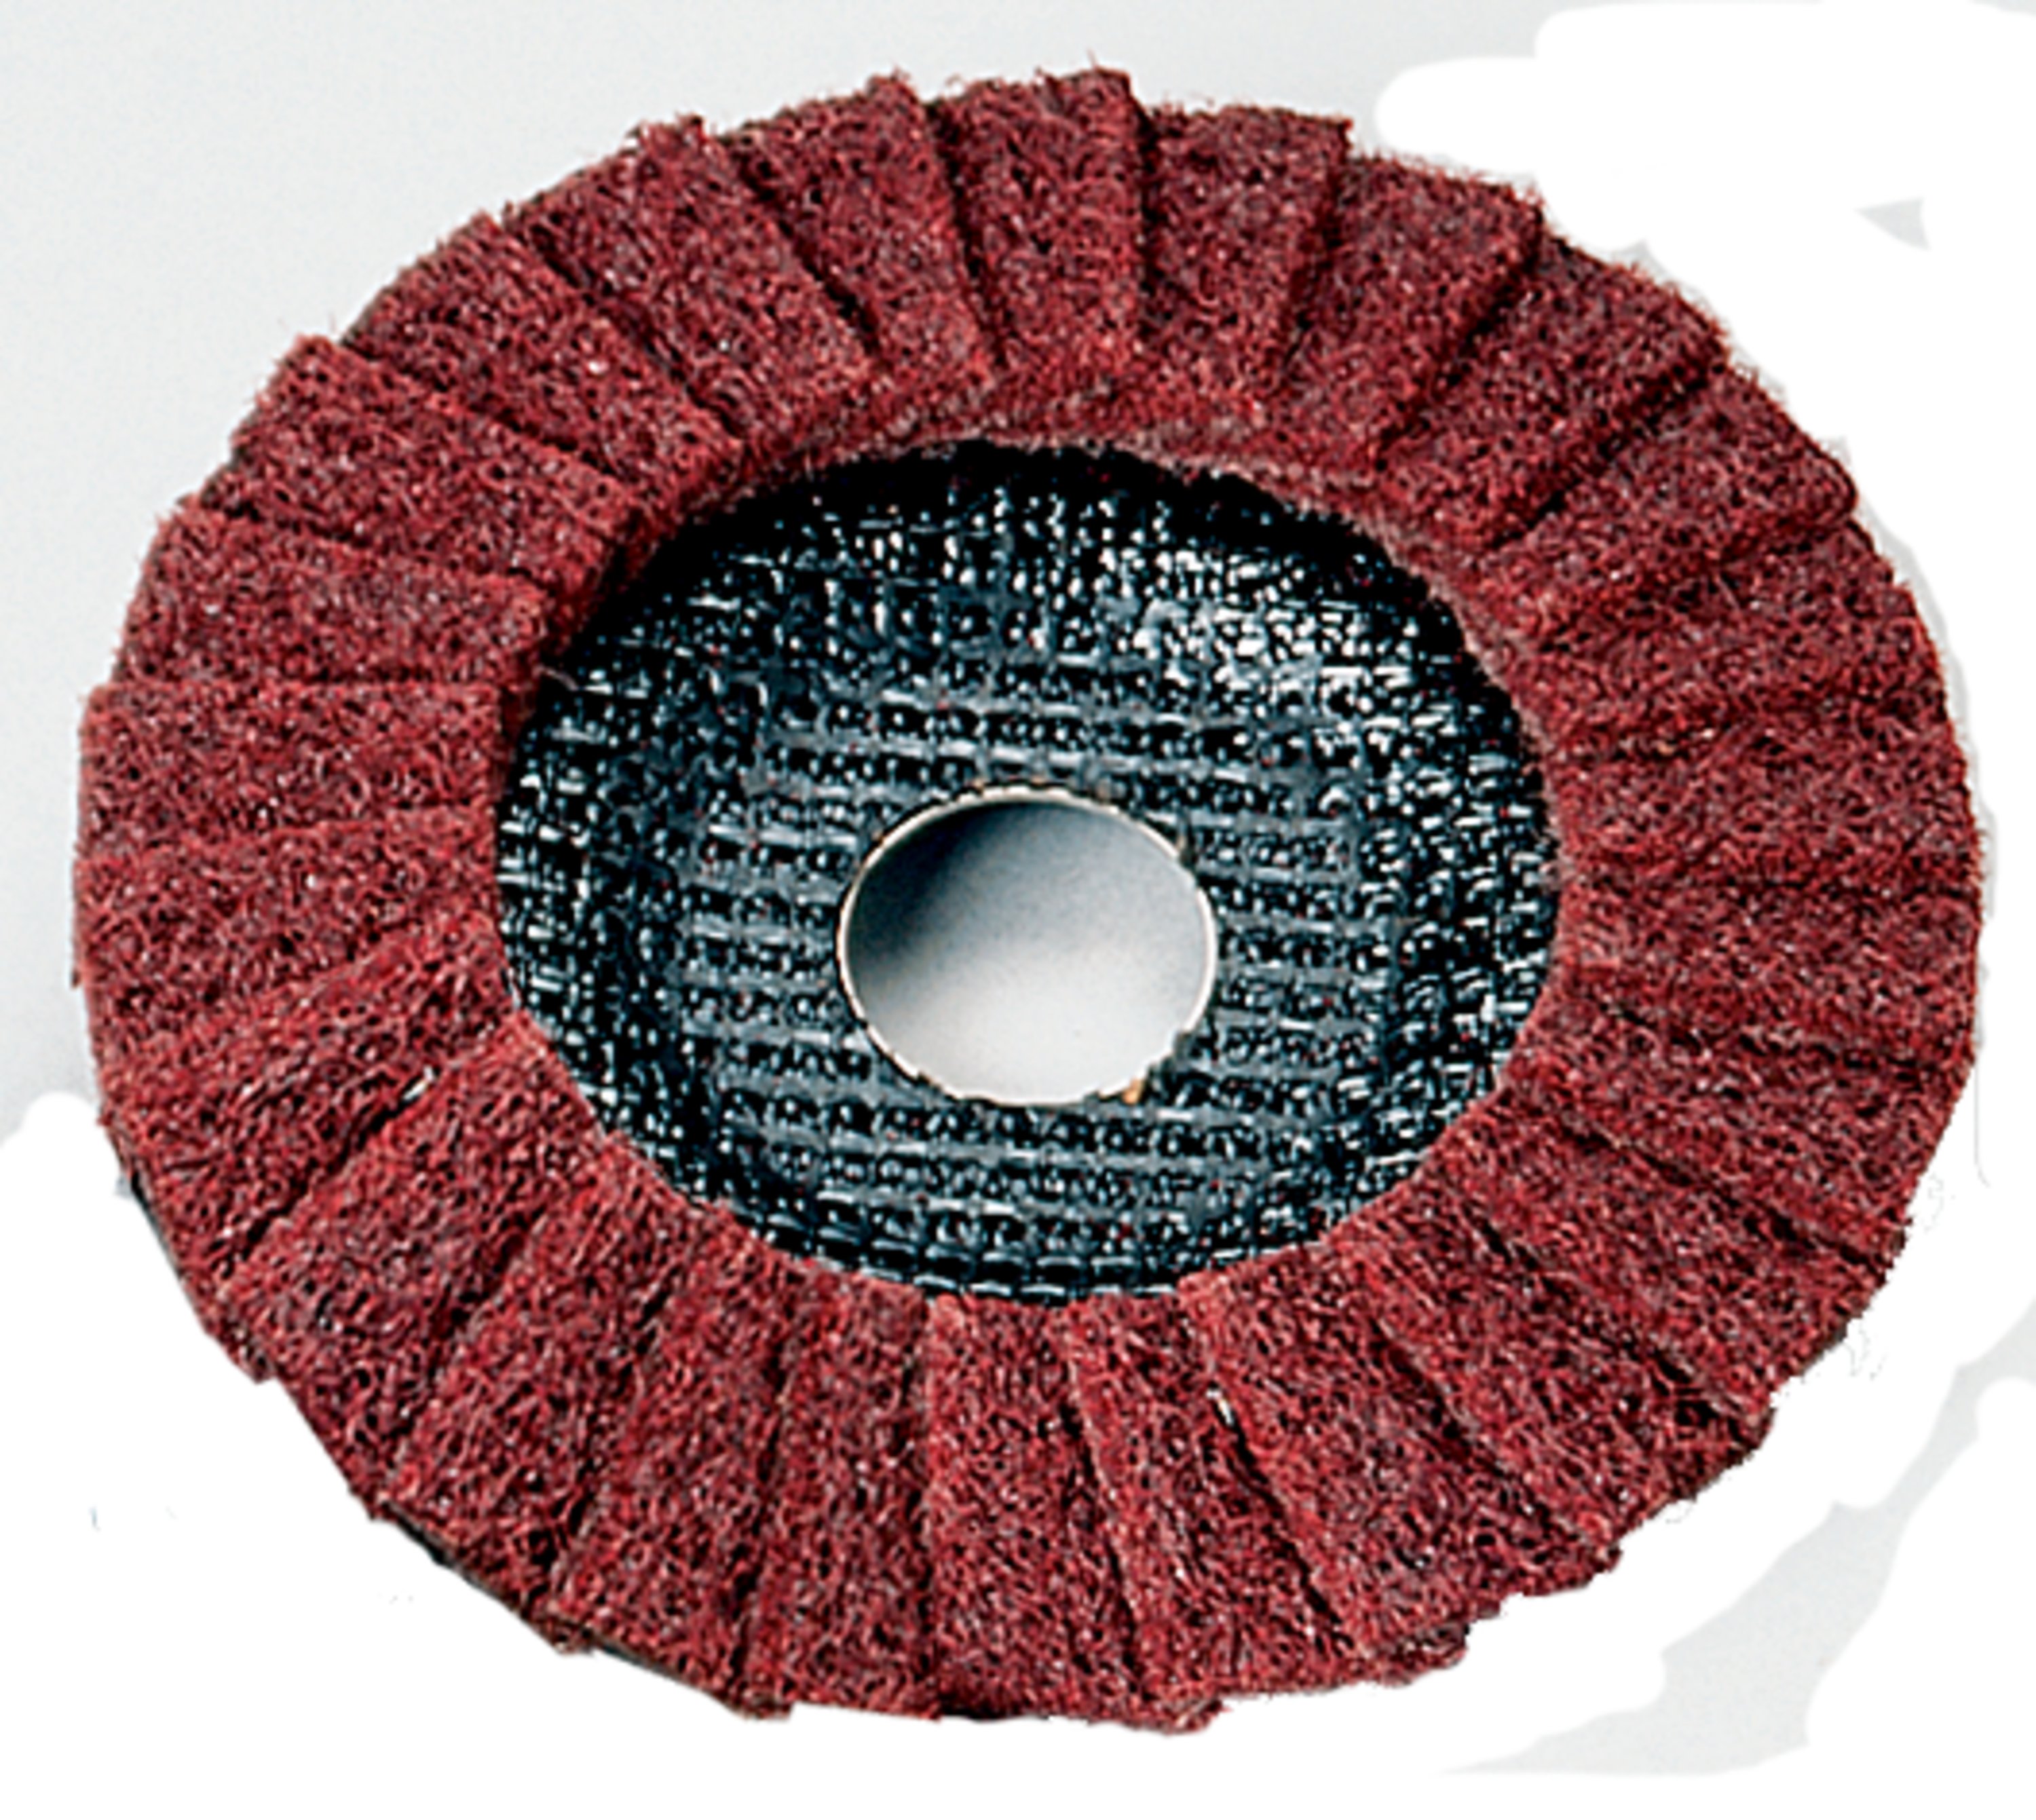 Standard Abrasives™ Surface Conditioning Flap Disc delivers a fast cut and consistent finish in a single step.